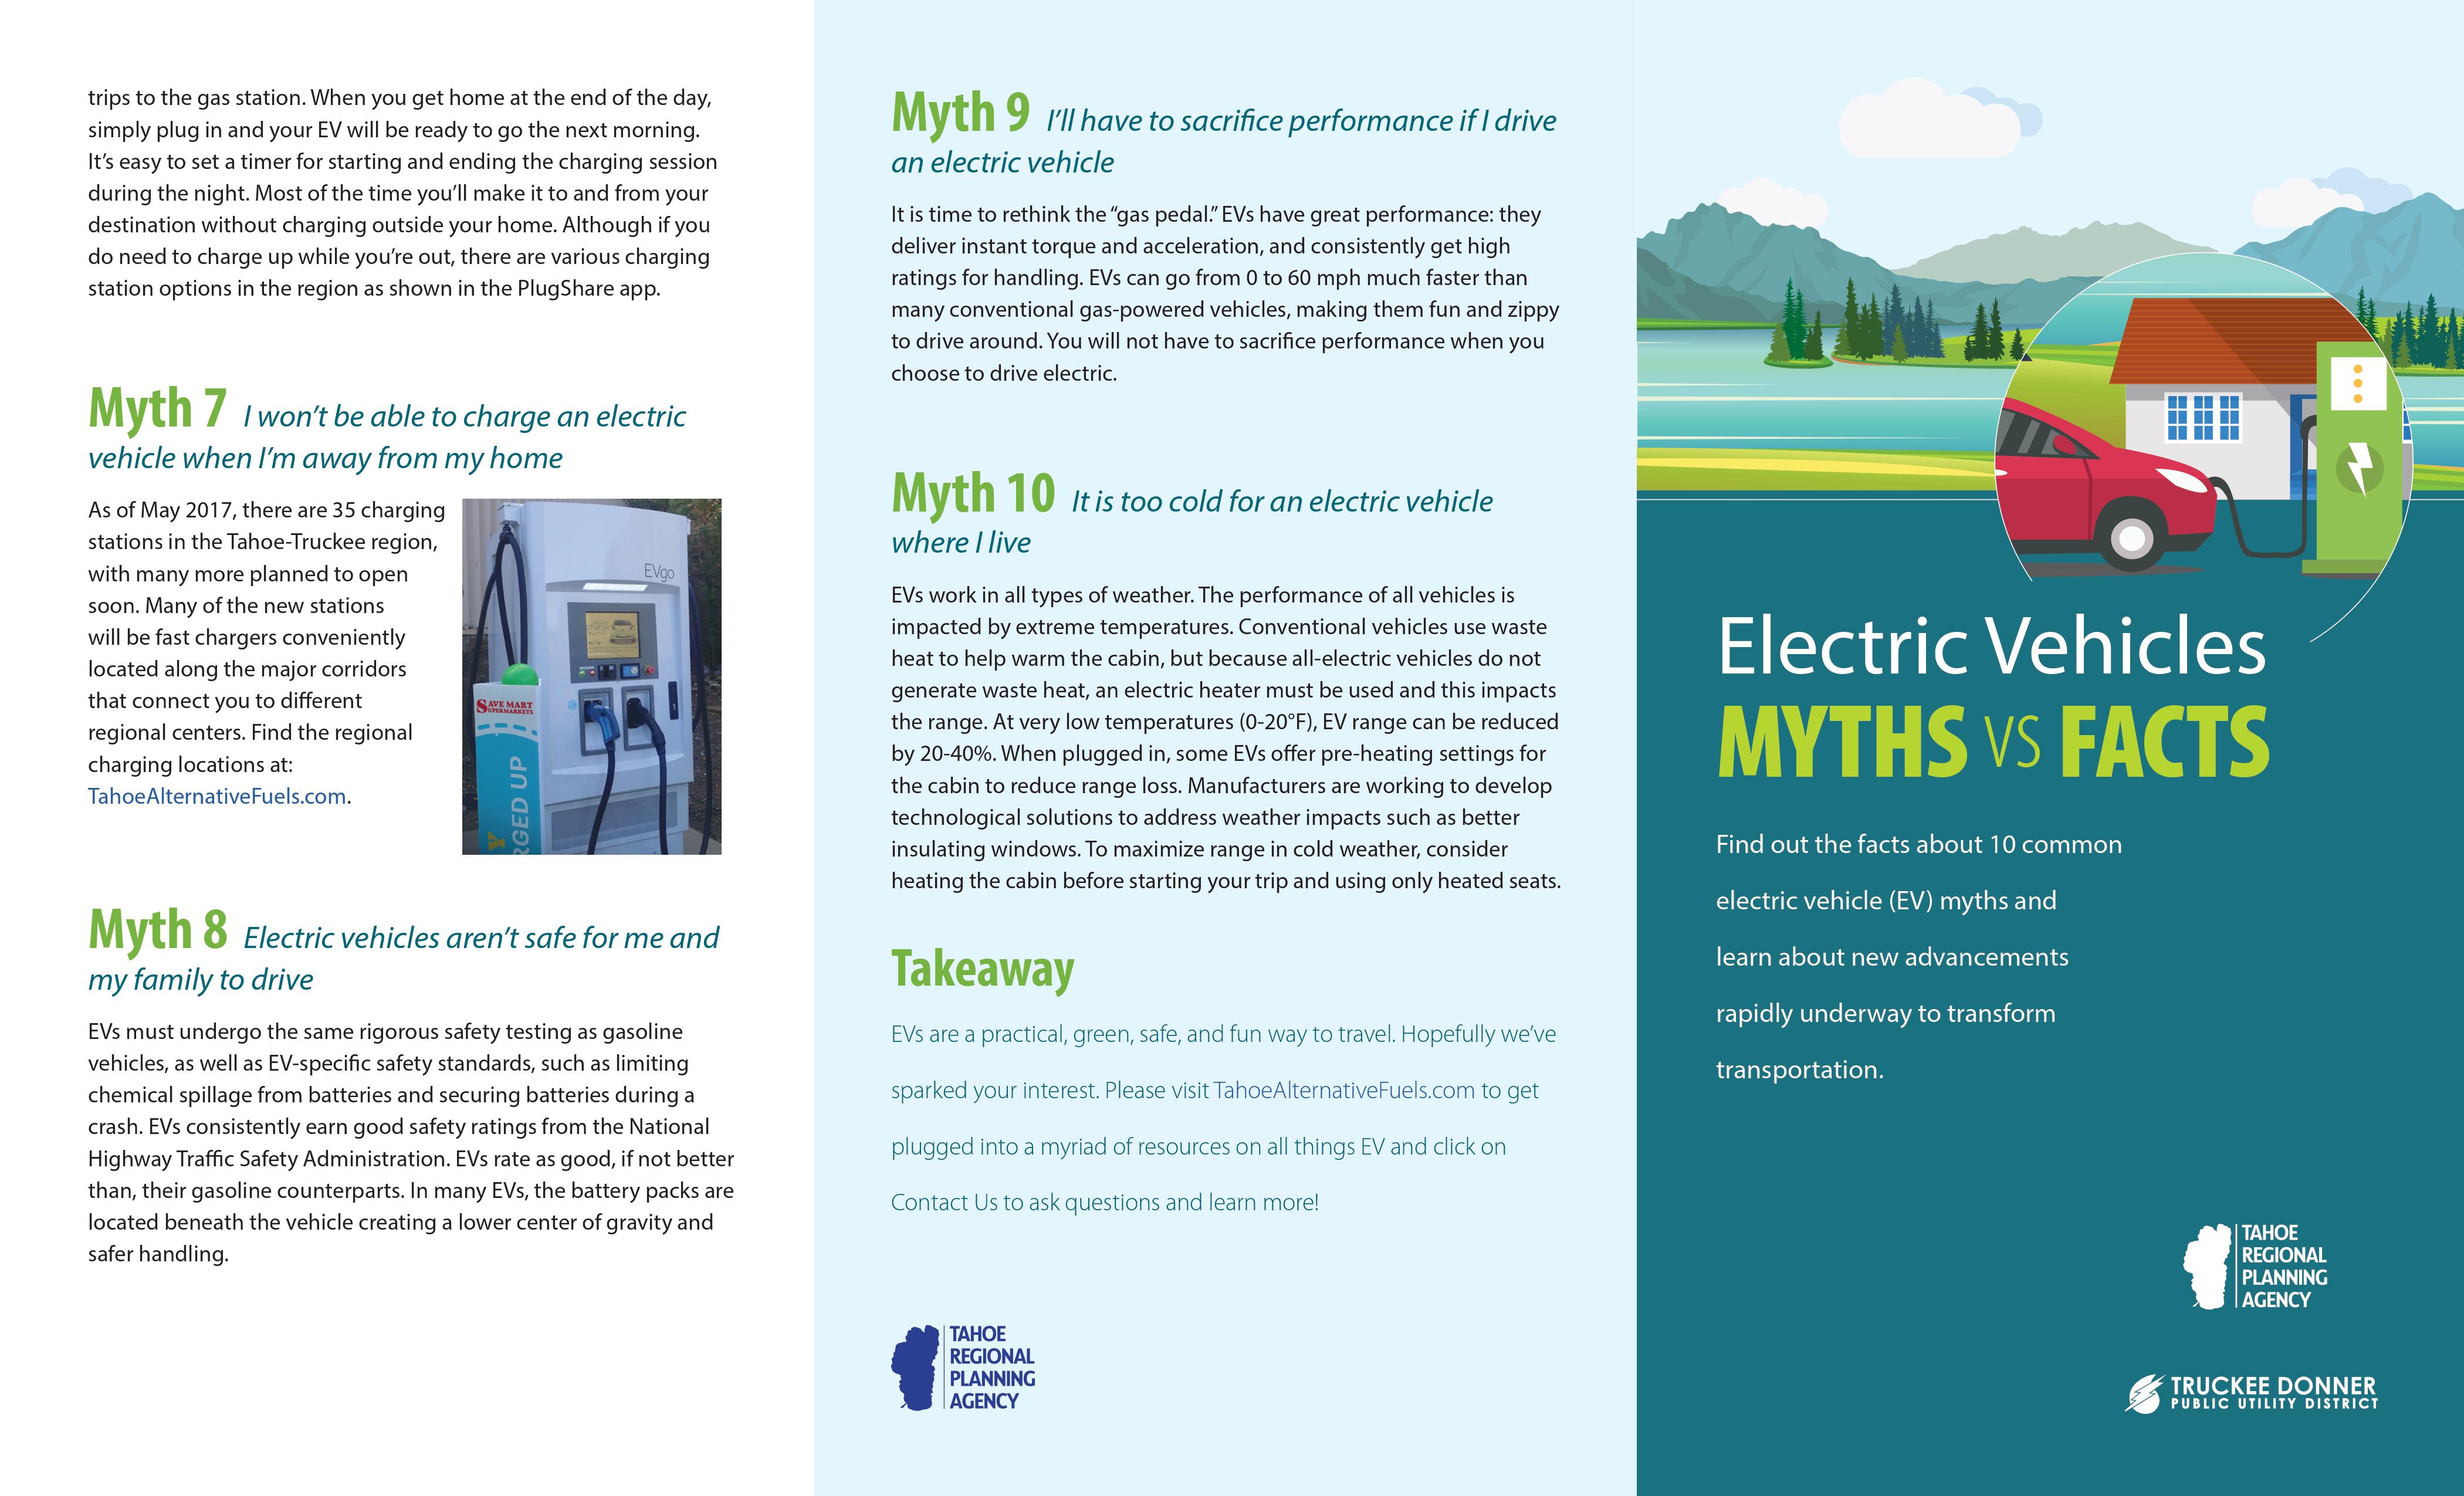 Electric Vehicles: Myths vs Facts